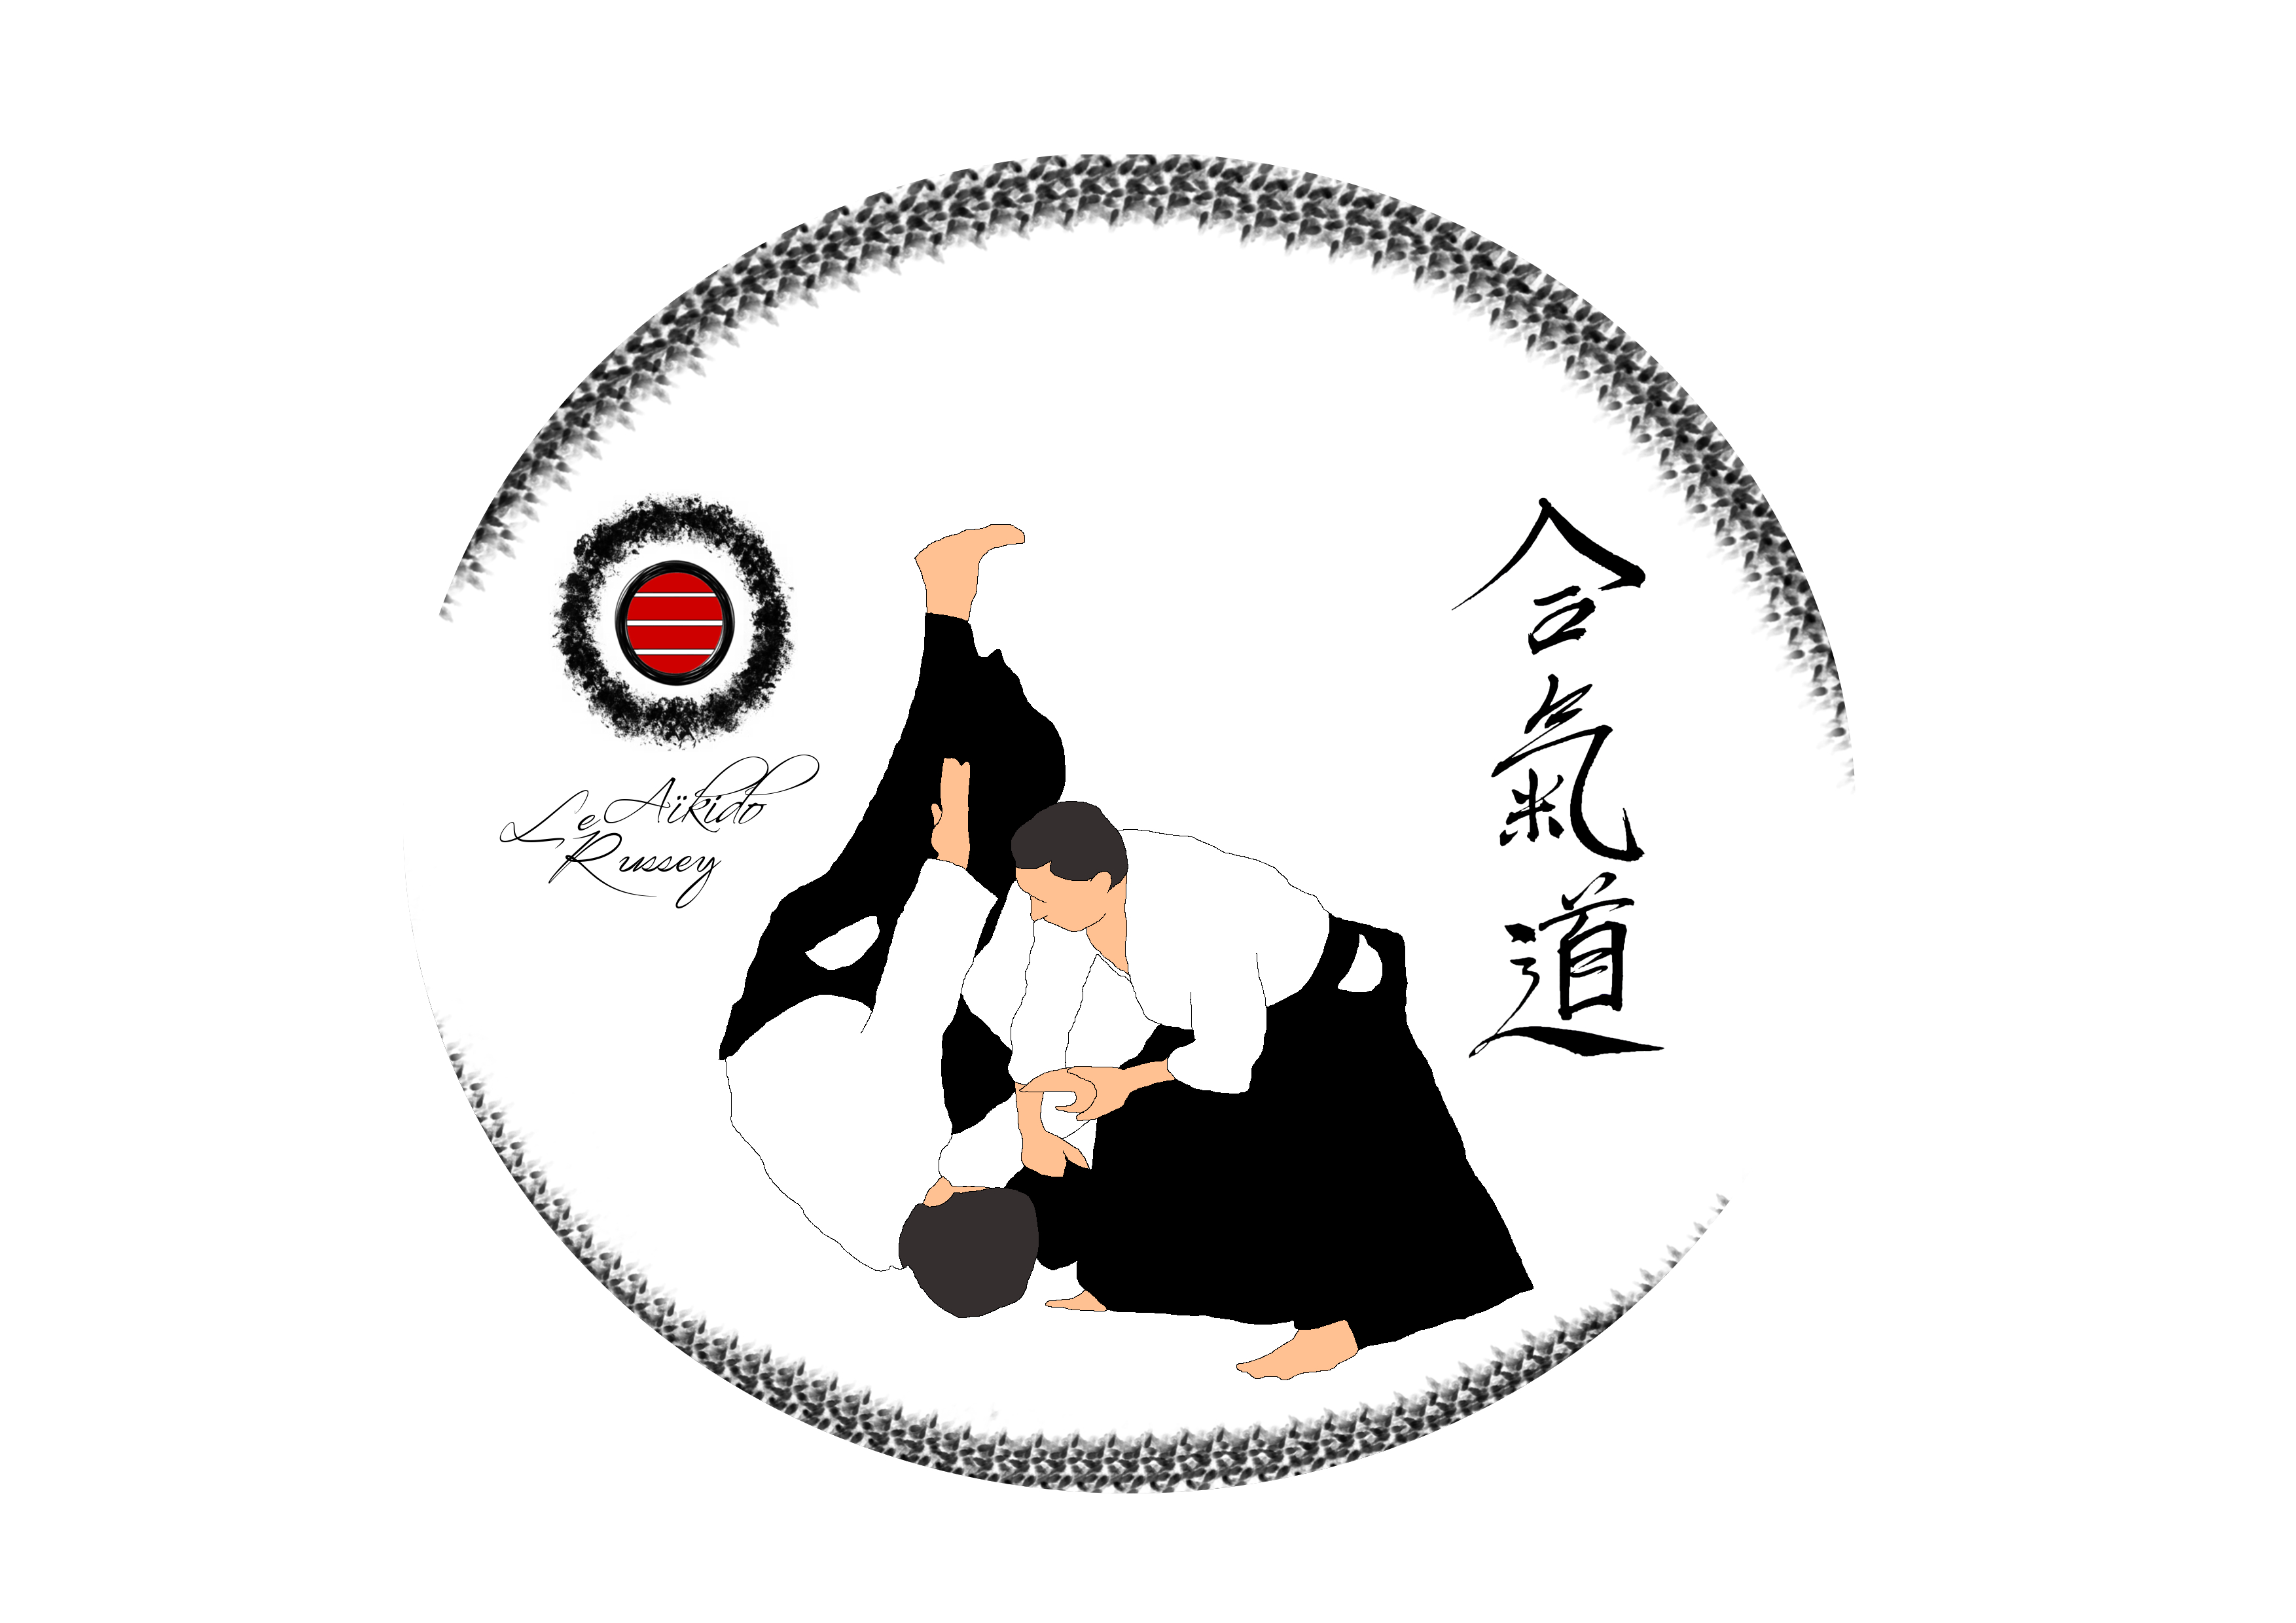 AIKIDO LE RUSSEY